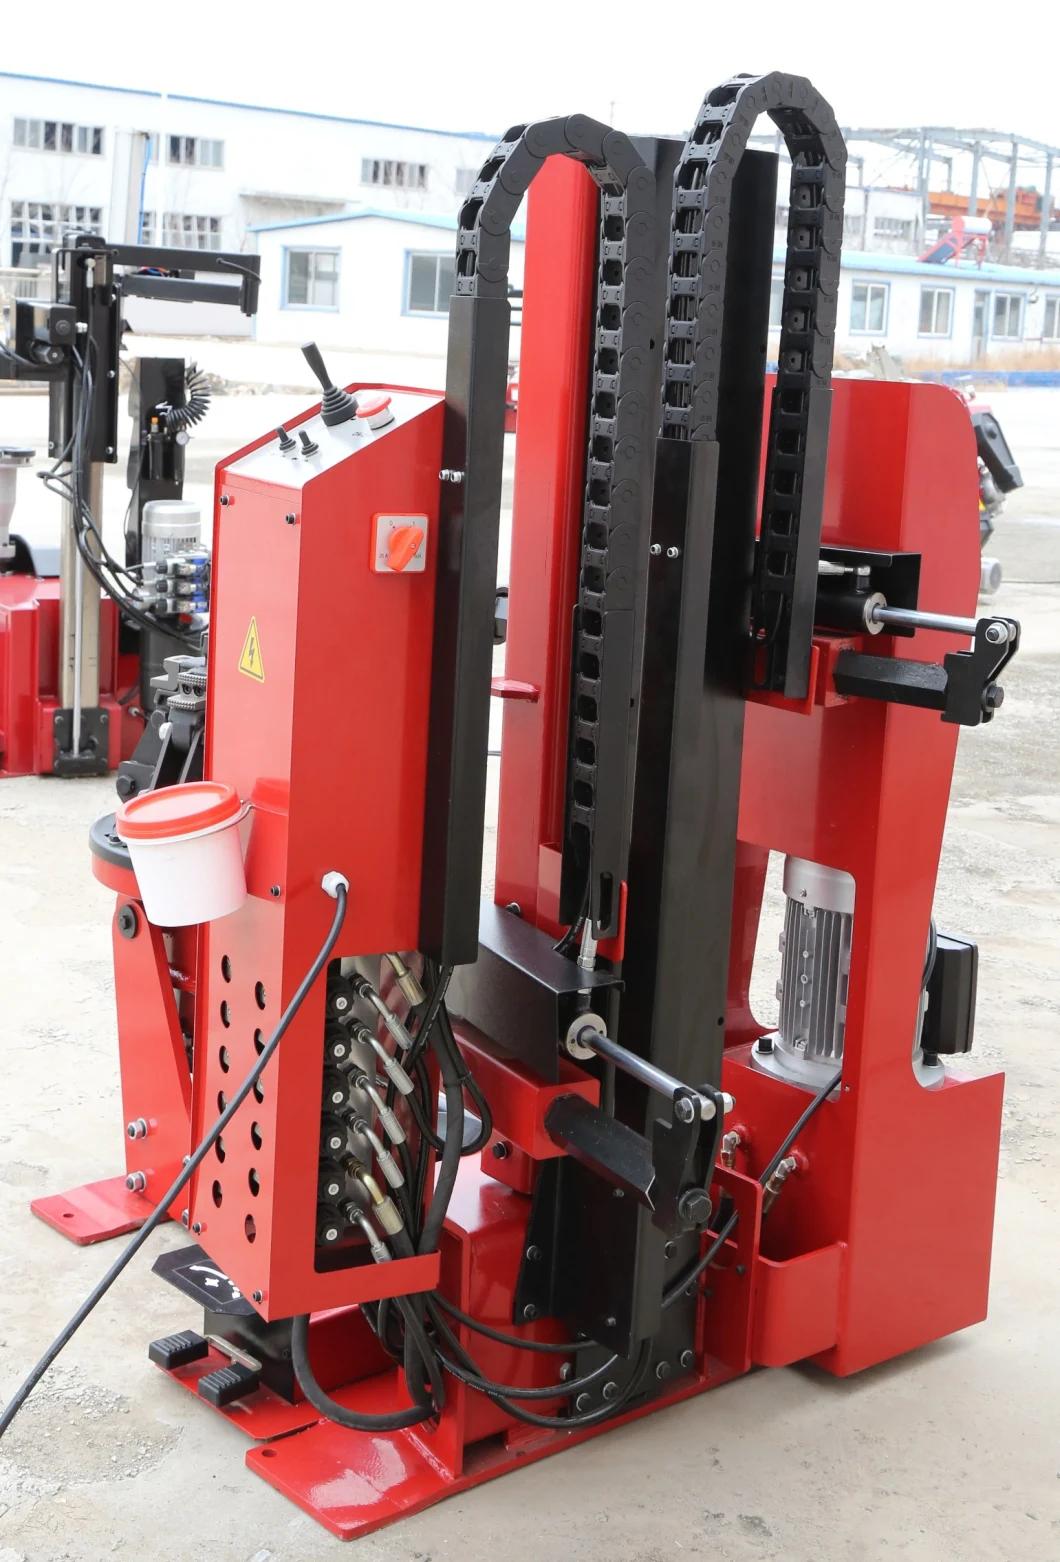 Vertical Design Heavy Duty Semi Automatic Pneumatic Tyre Changer for Truck Repair